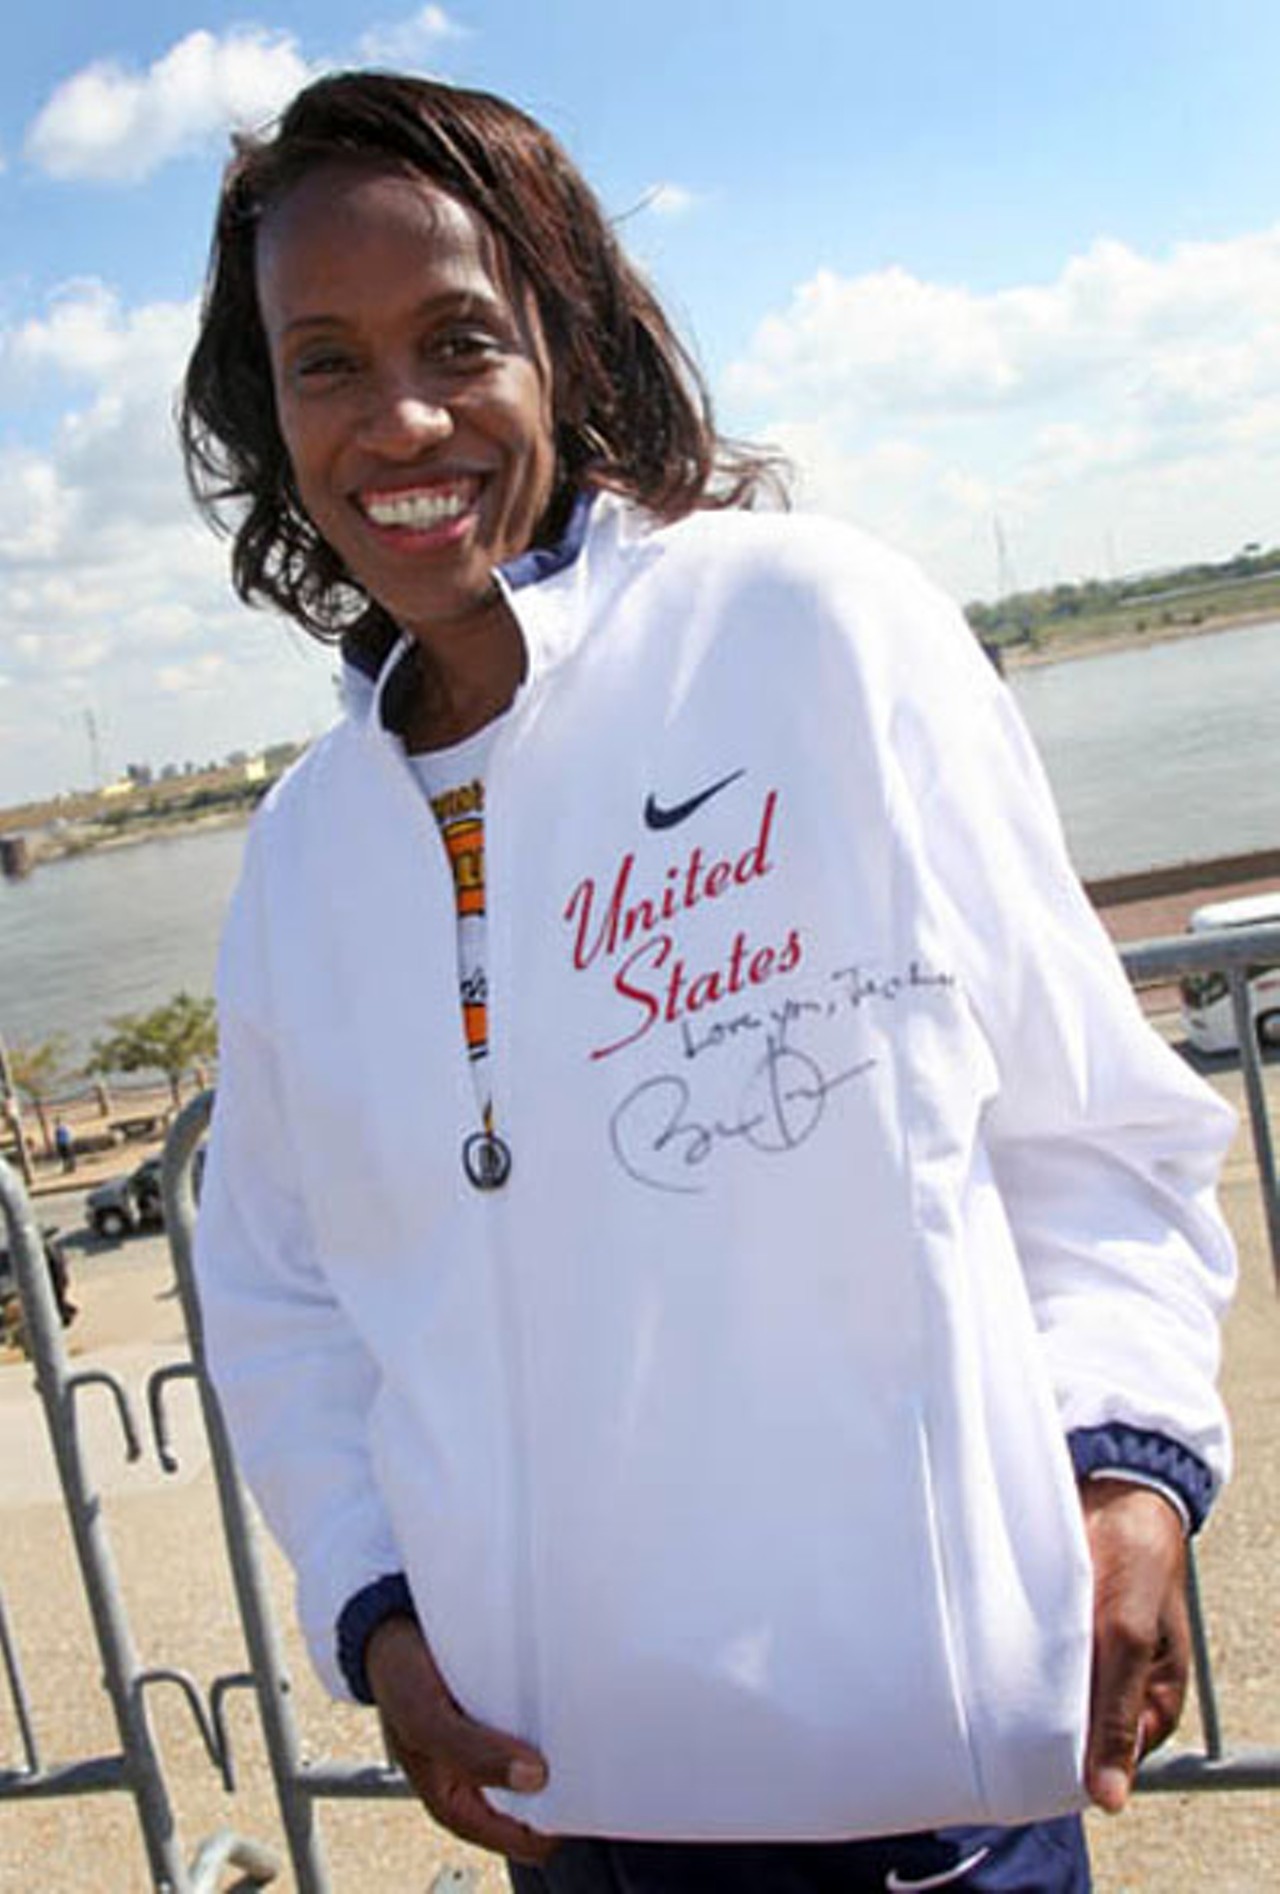 East St. Louis native and Olympian Jackie Joyner-Kersee had her Olympic jacket signed by Obama.